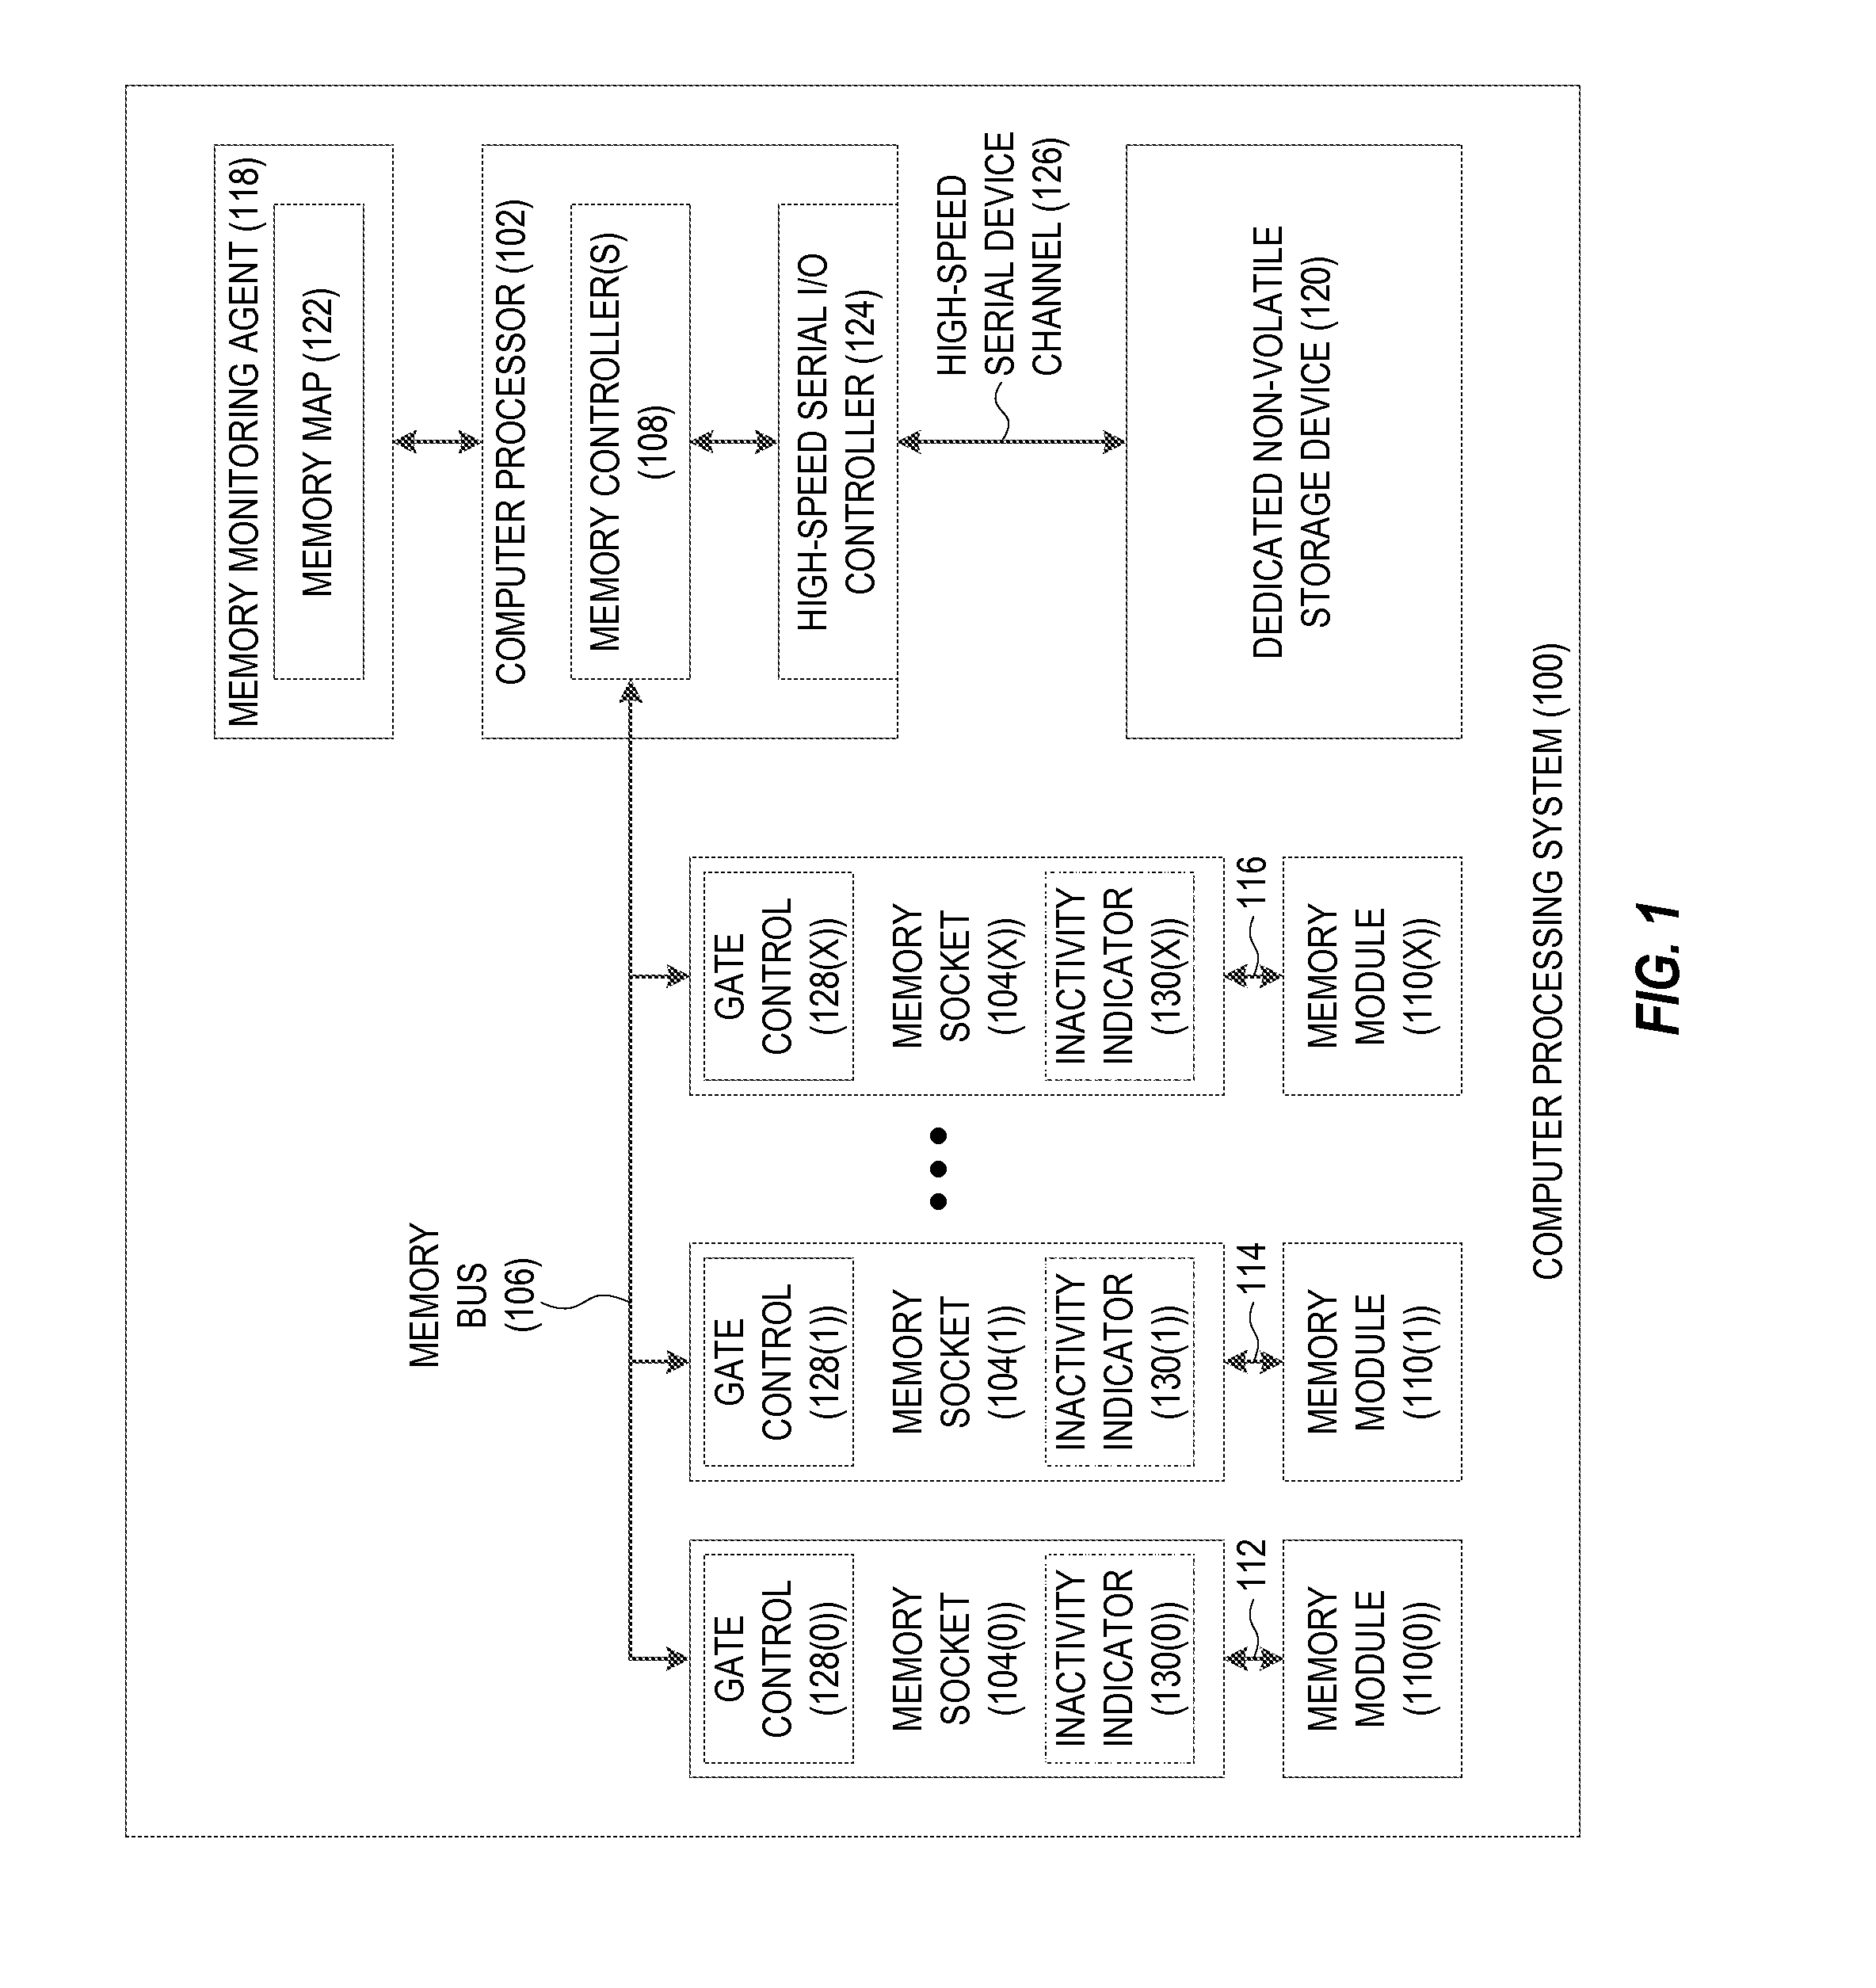 Reducing system downtime during memory subsystem maintenance in a computer processing system